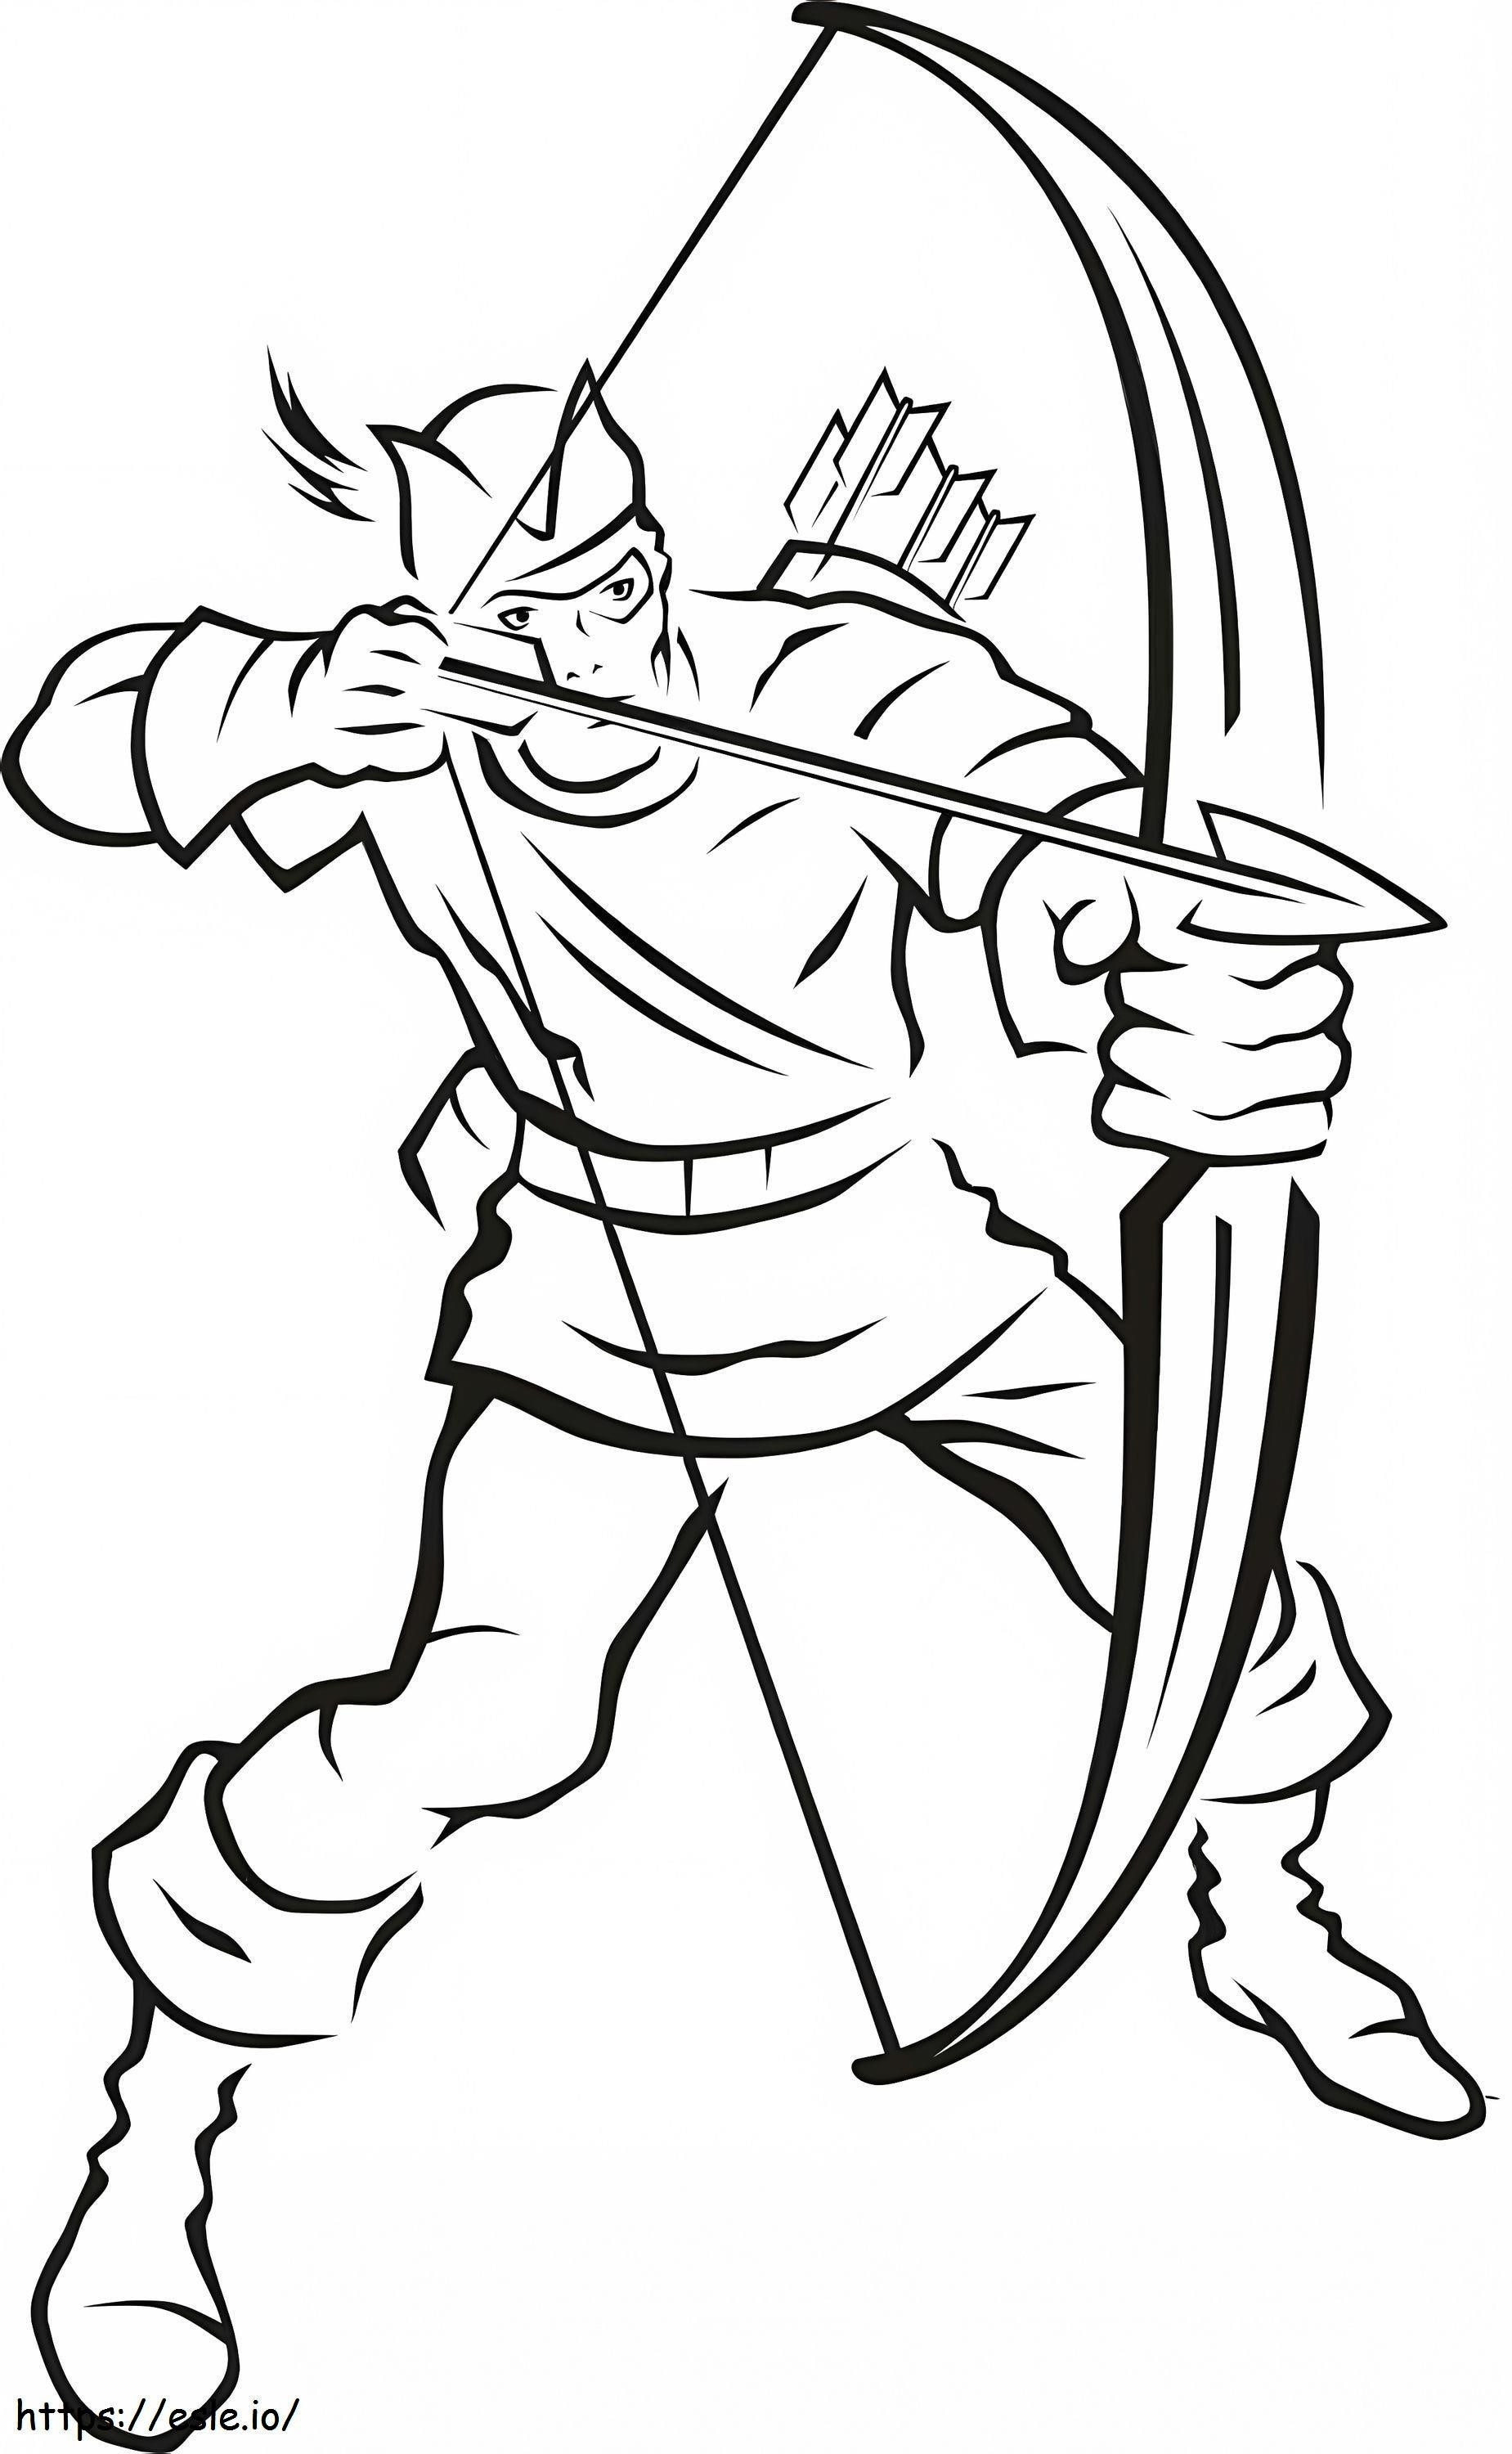 DC Green Arrow coloring page